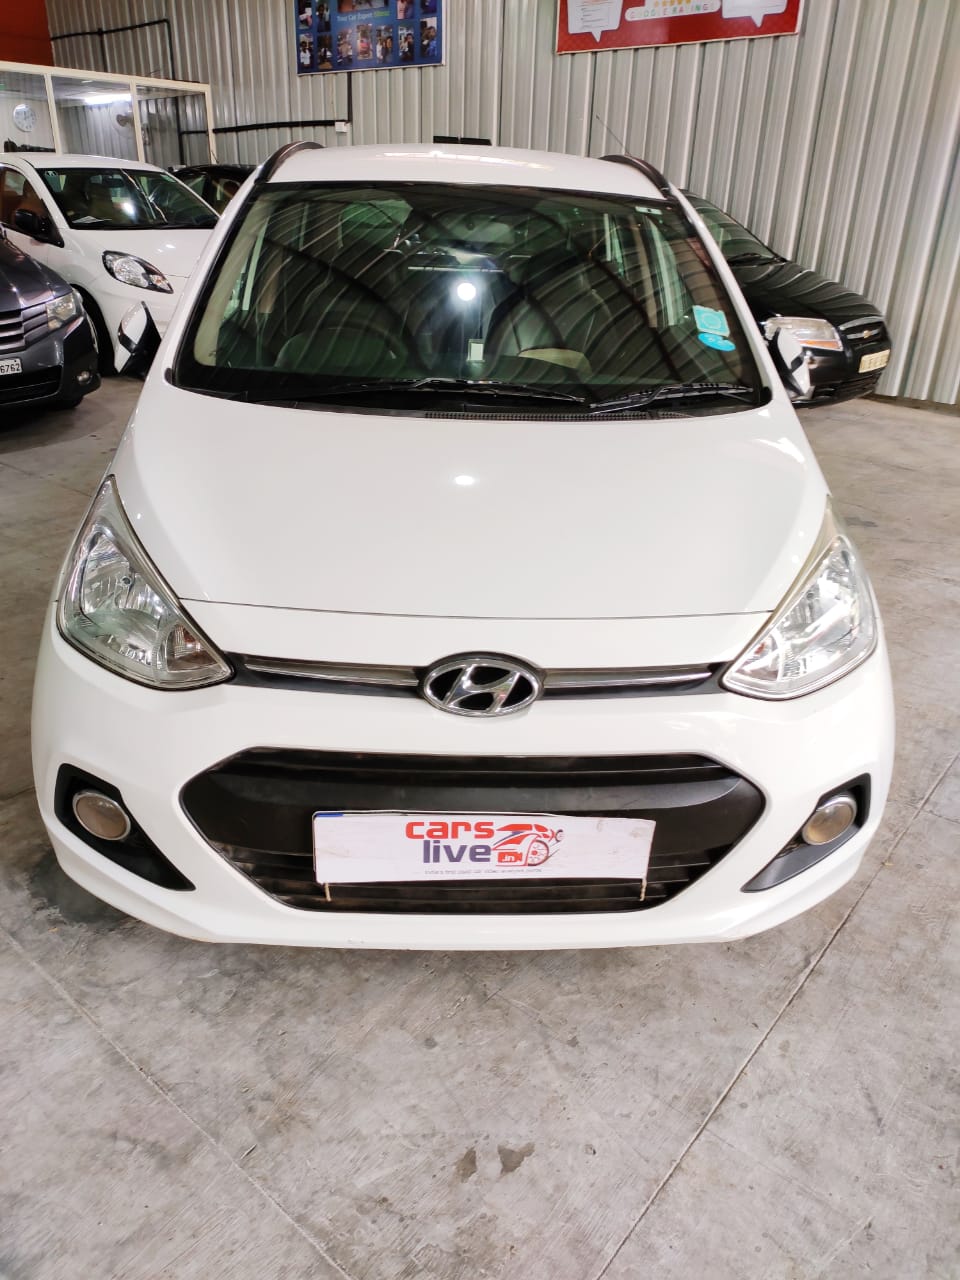 Hyundai i10 Grand Automatic Asta opt 1.2ltr Petrol 2014 ABS + Free Warranty  one Year - used cars for sale in Bangalore 